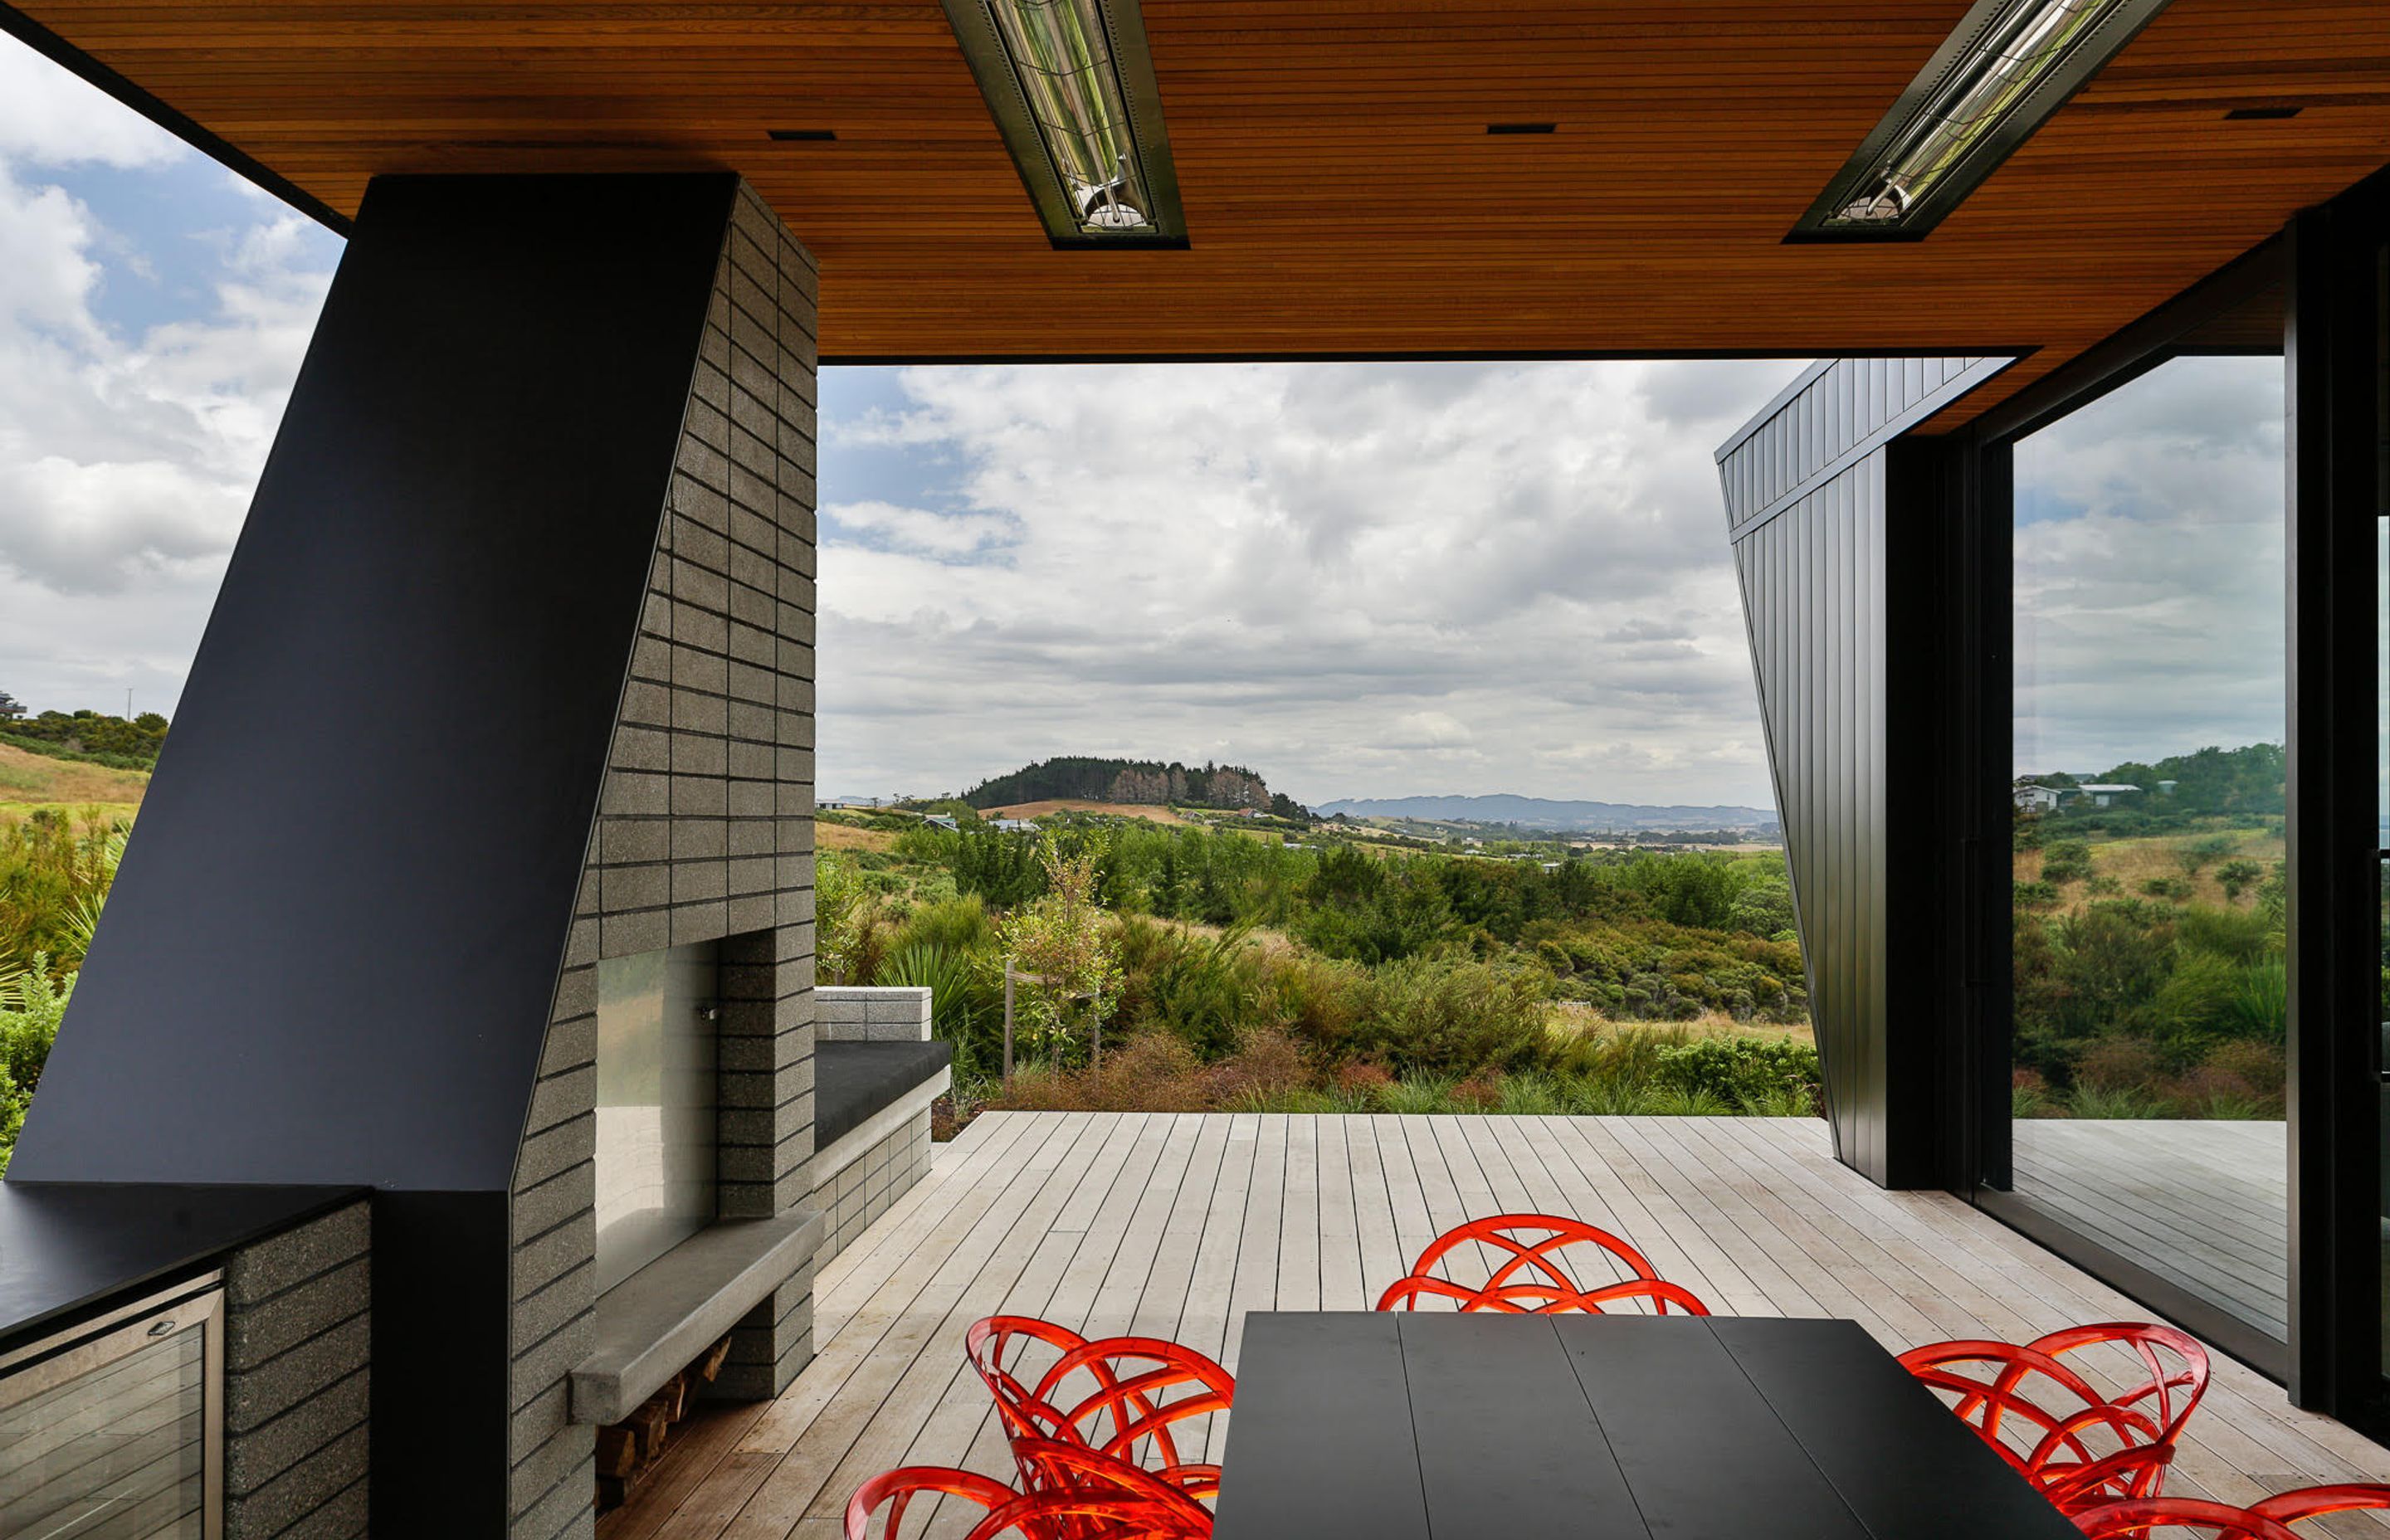 The southeast facing sheltered outdoor space is heralded by an outdoor fire and kitchen. 